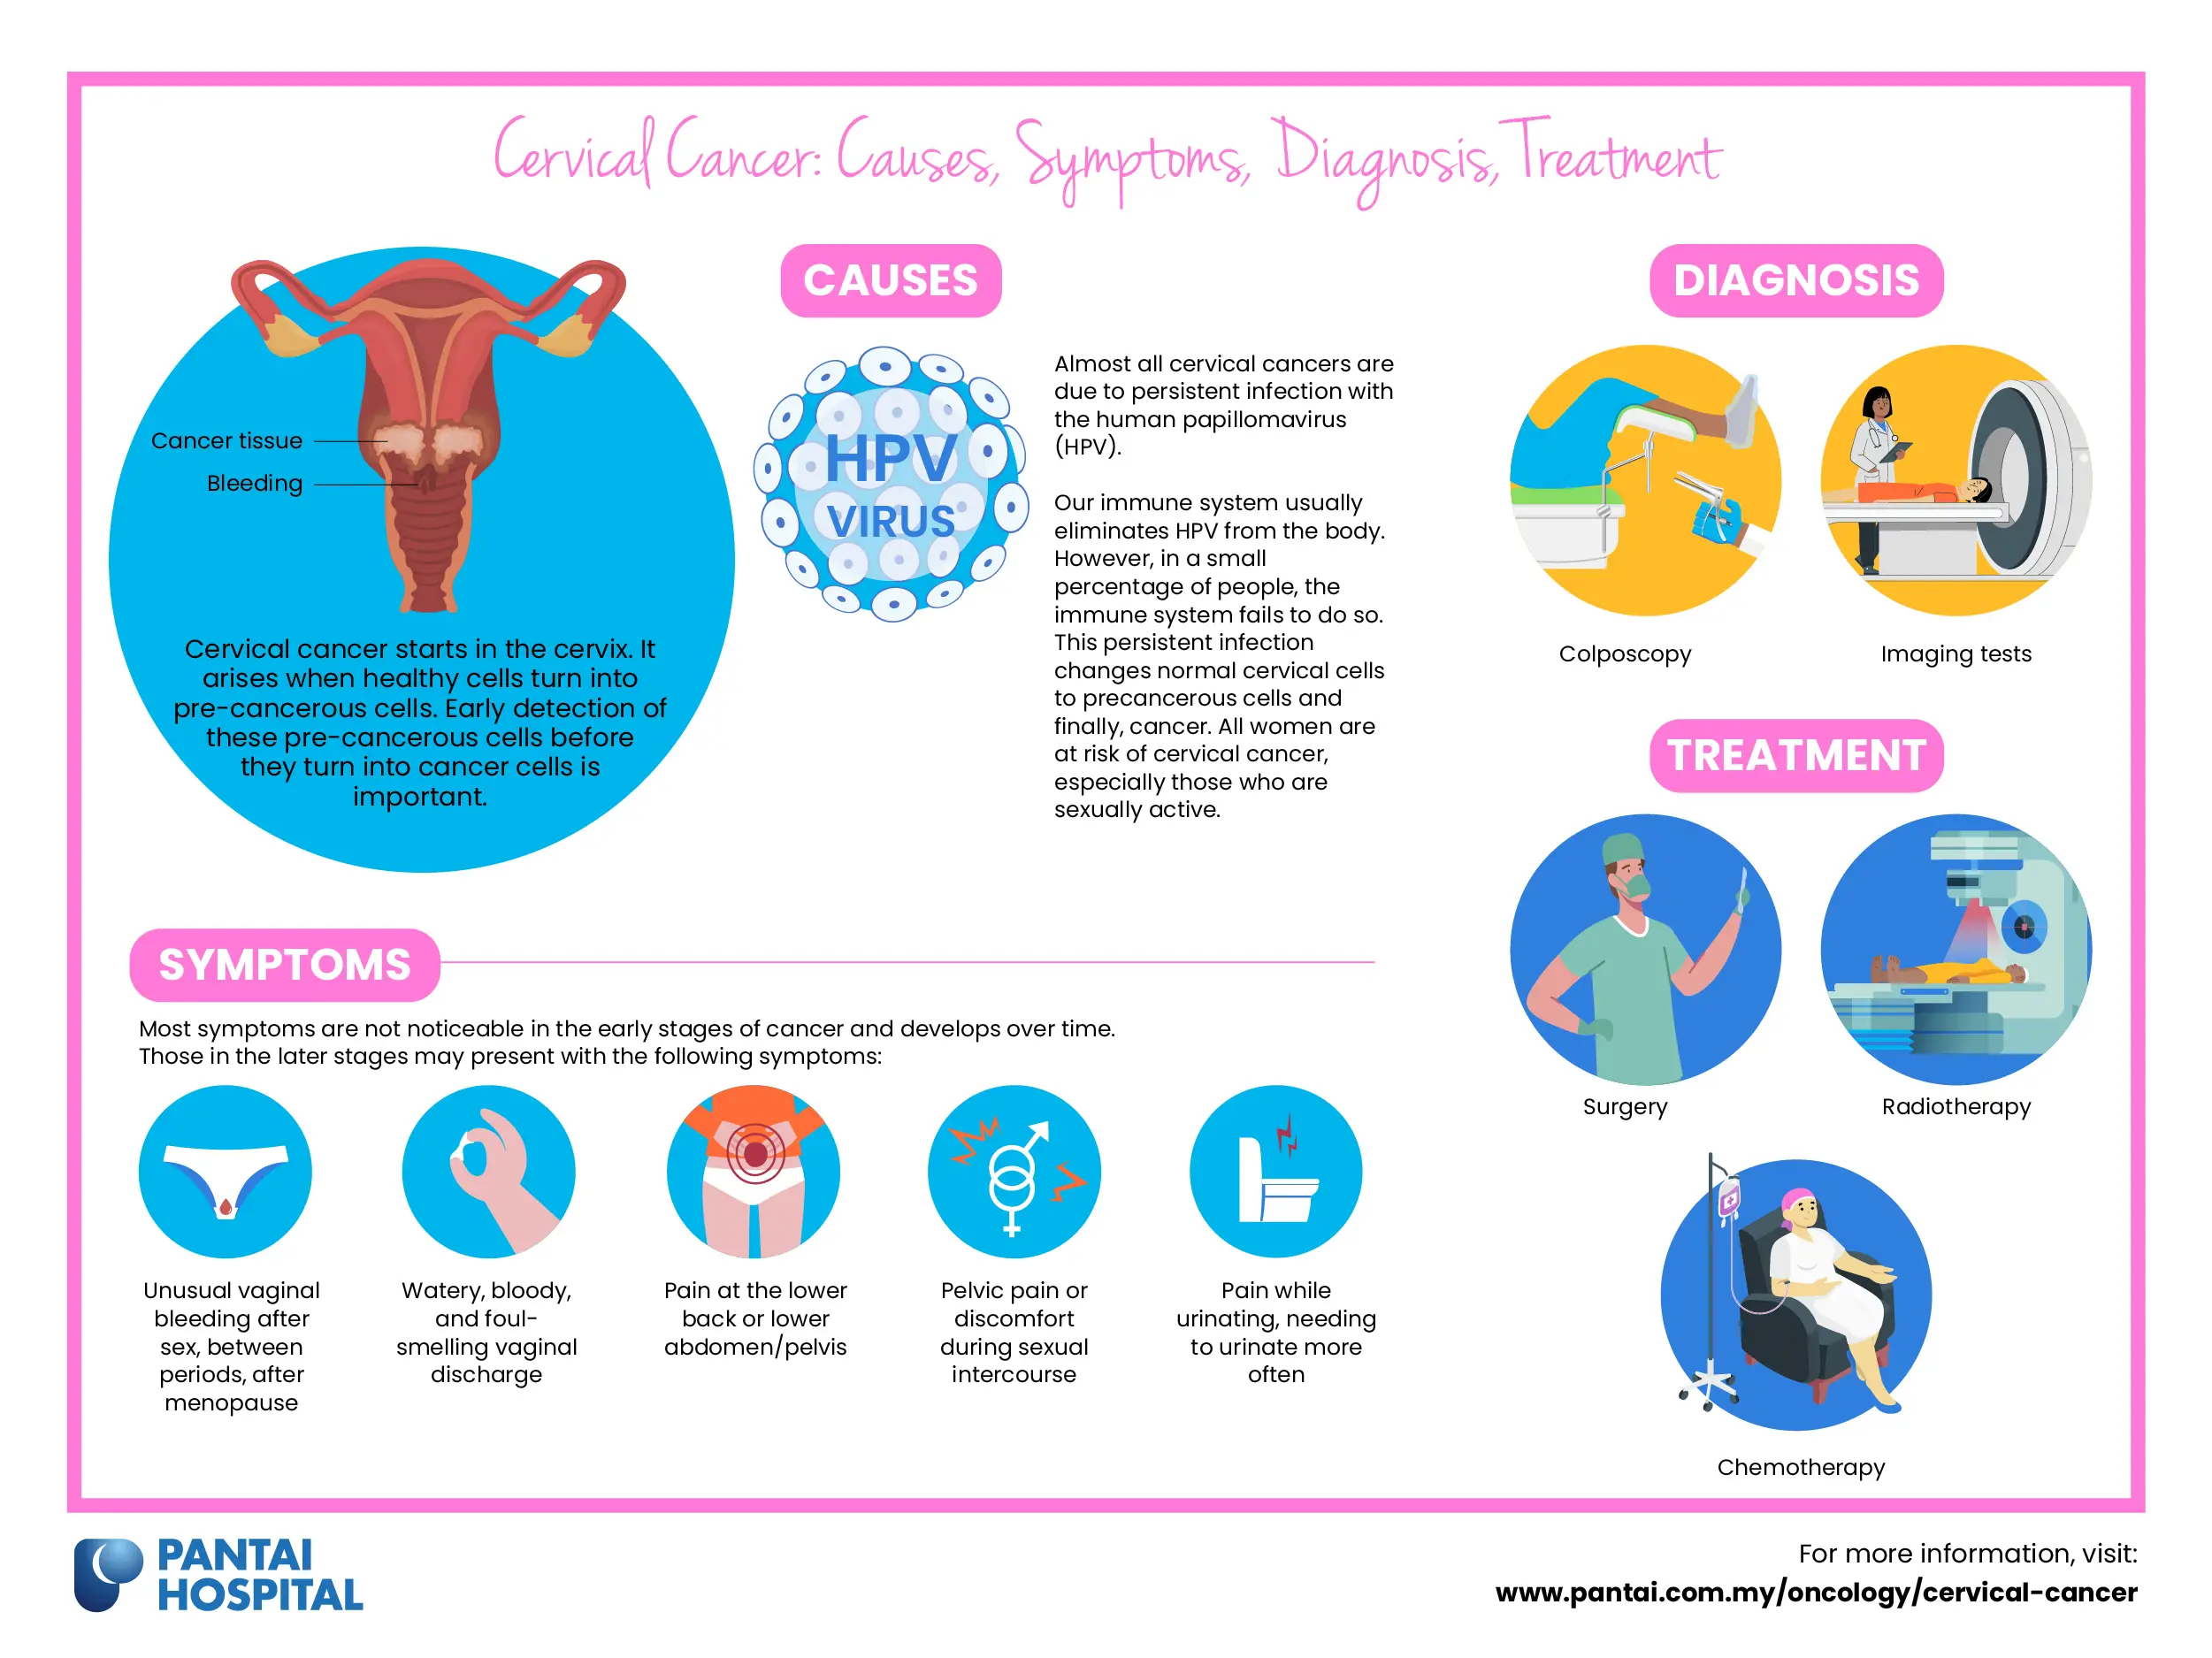 Infographic showing cervical cancer, its causes, symptoms, diagnosis options and treatments available.